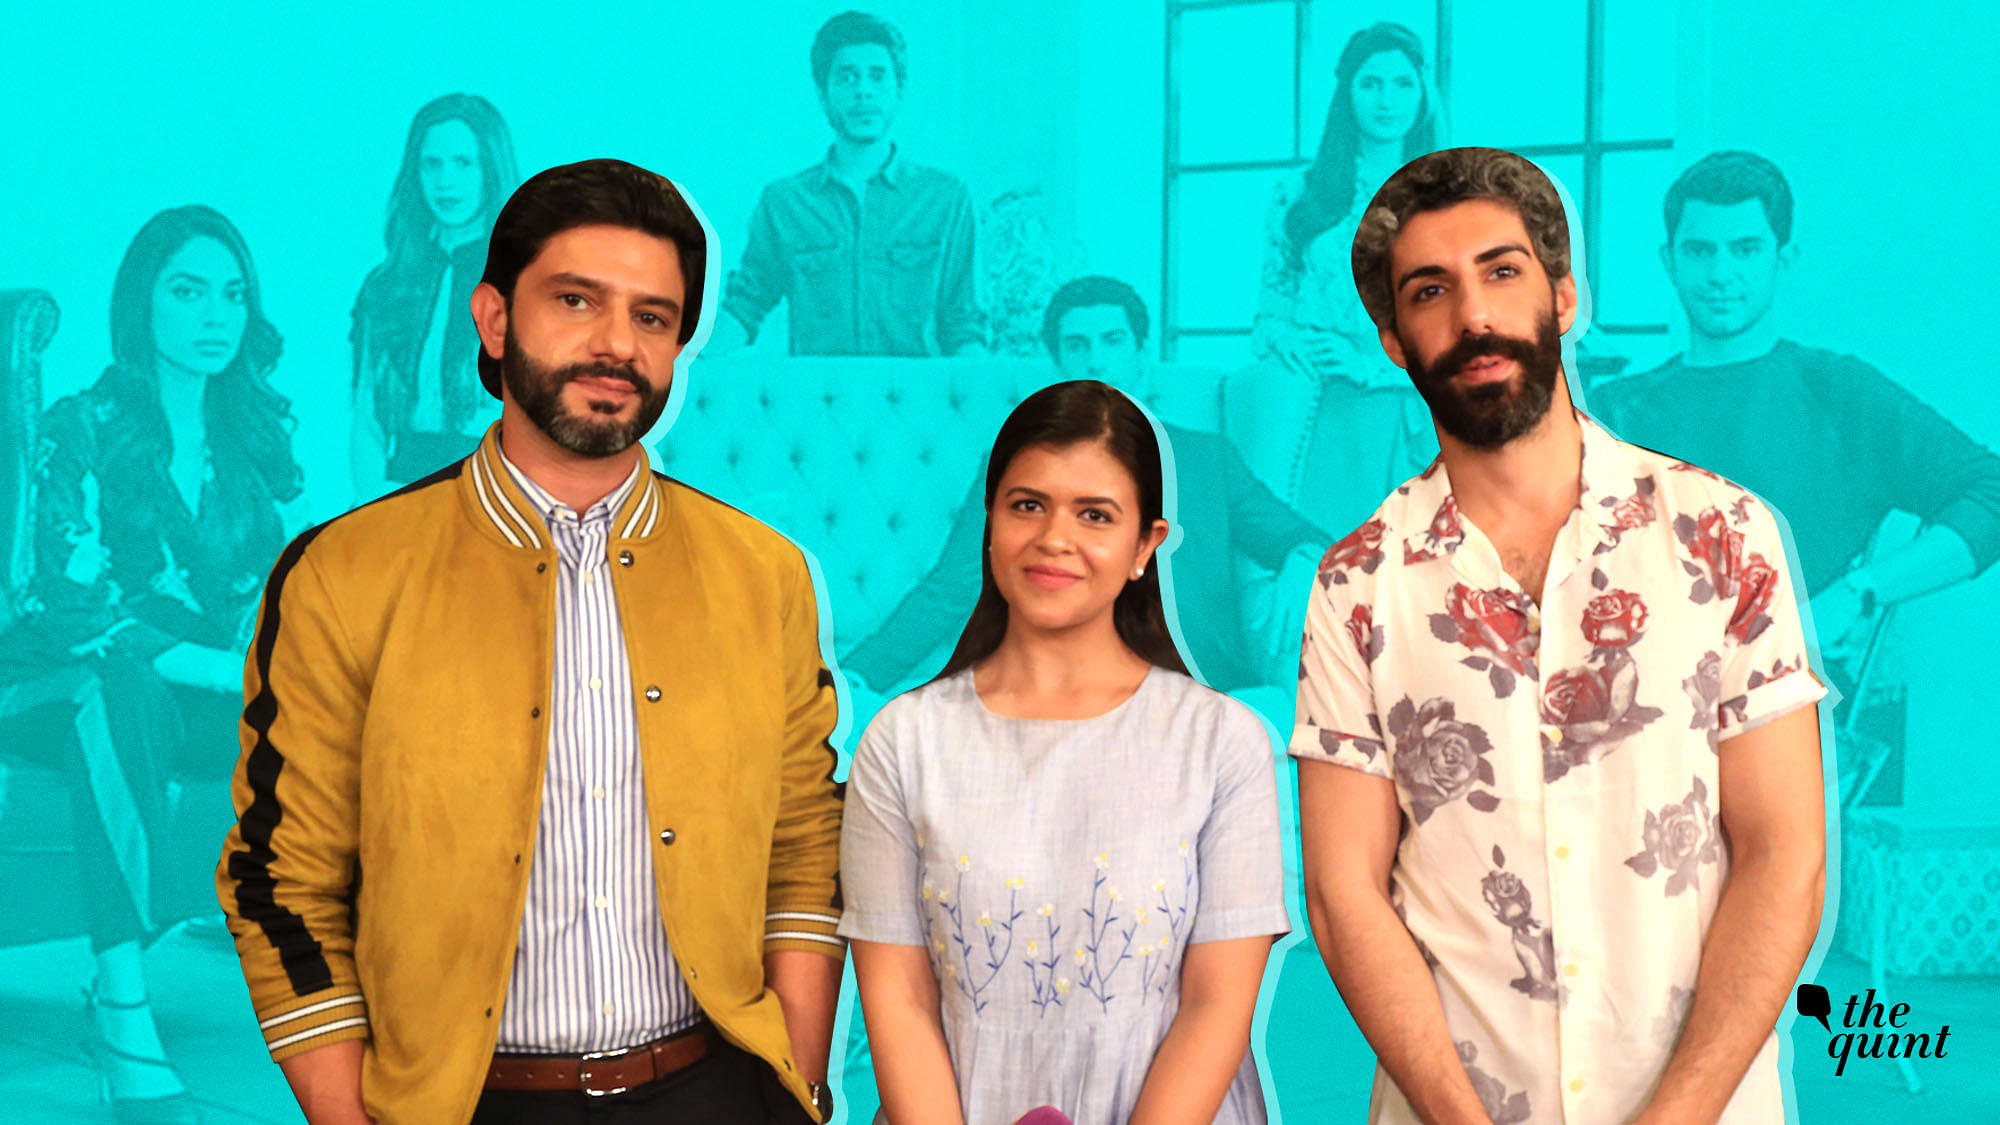 Jim Sarbh and Arjun Mathur star in Amazon Prime Video web series <i>Made in Heaven</i>.